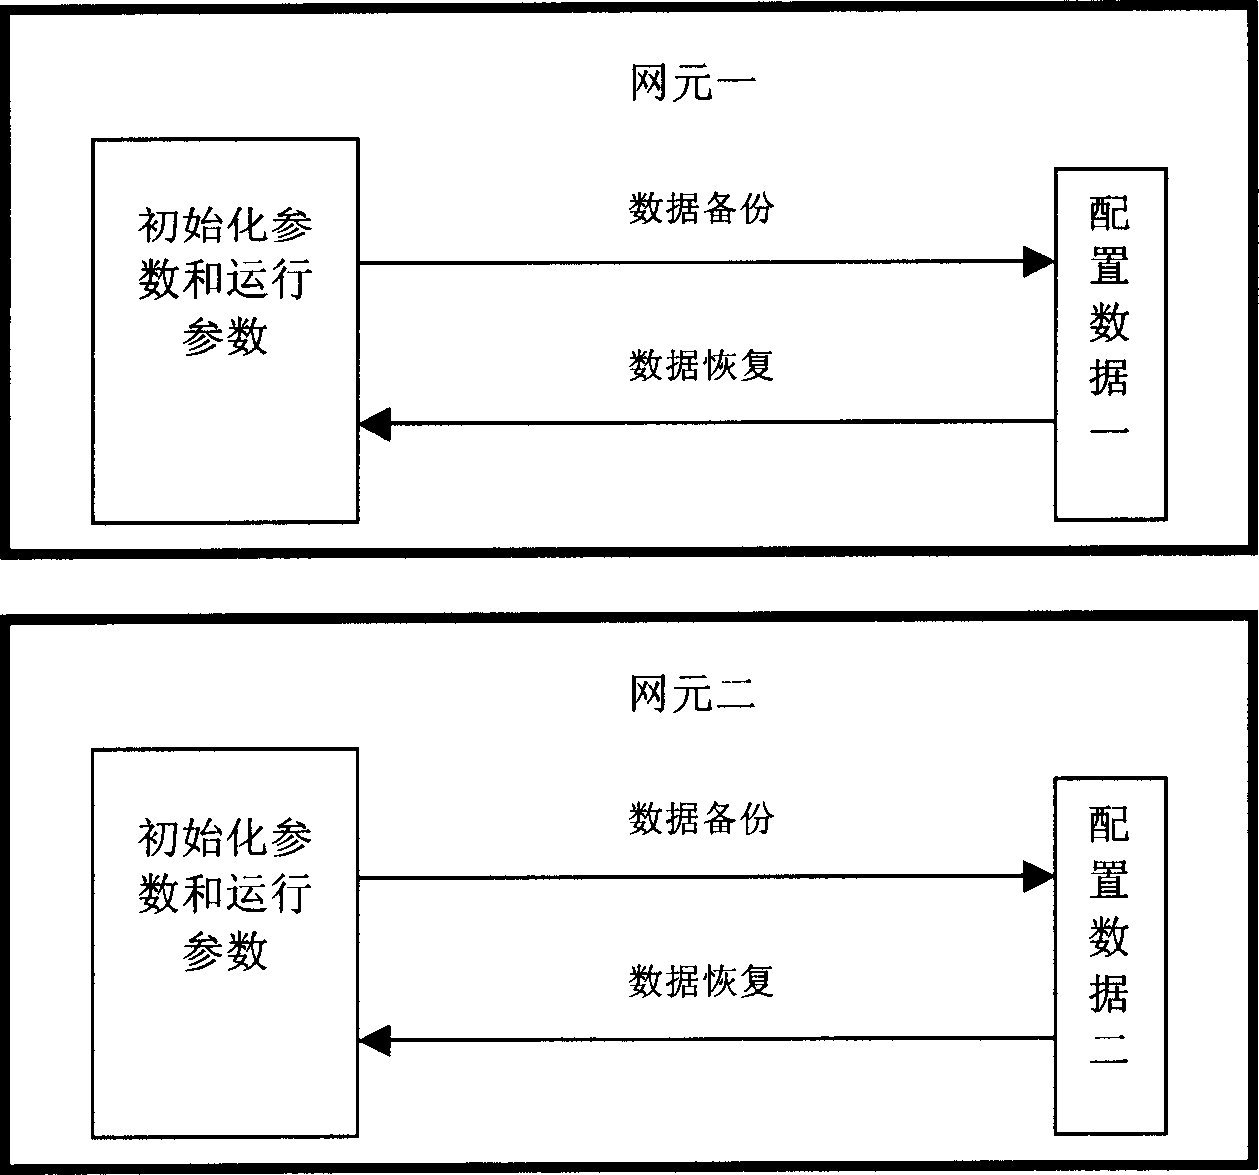 Method and system for duplicating and recovering network element configuration data